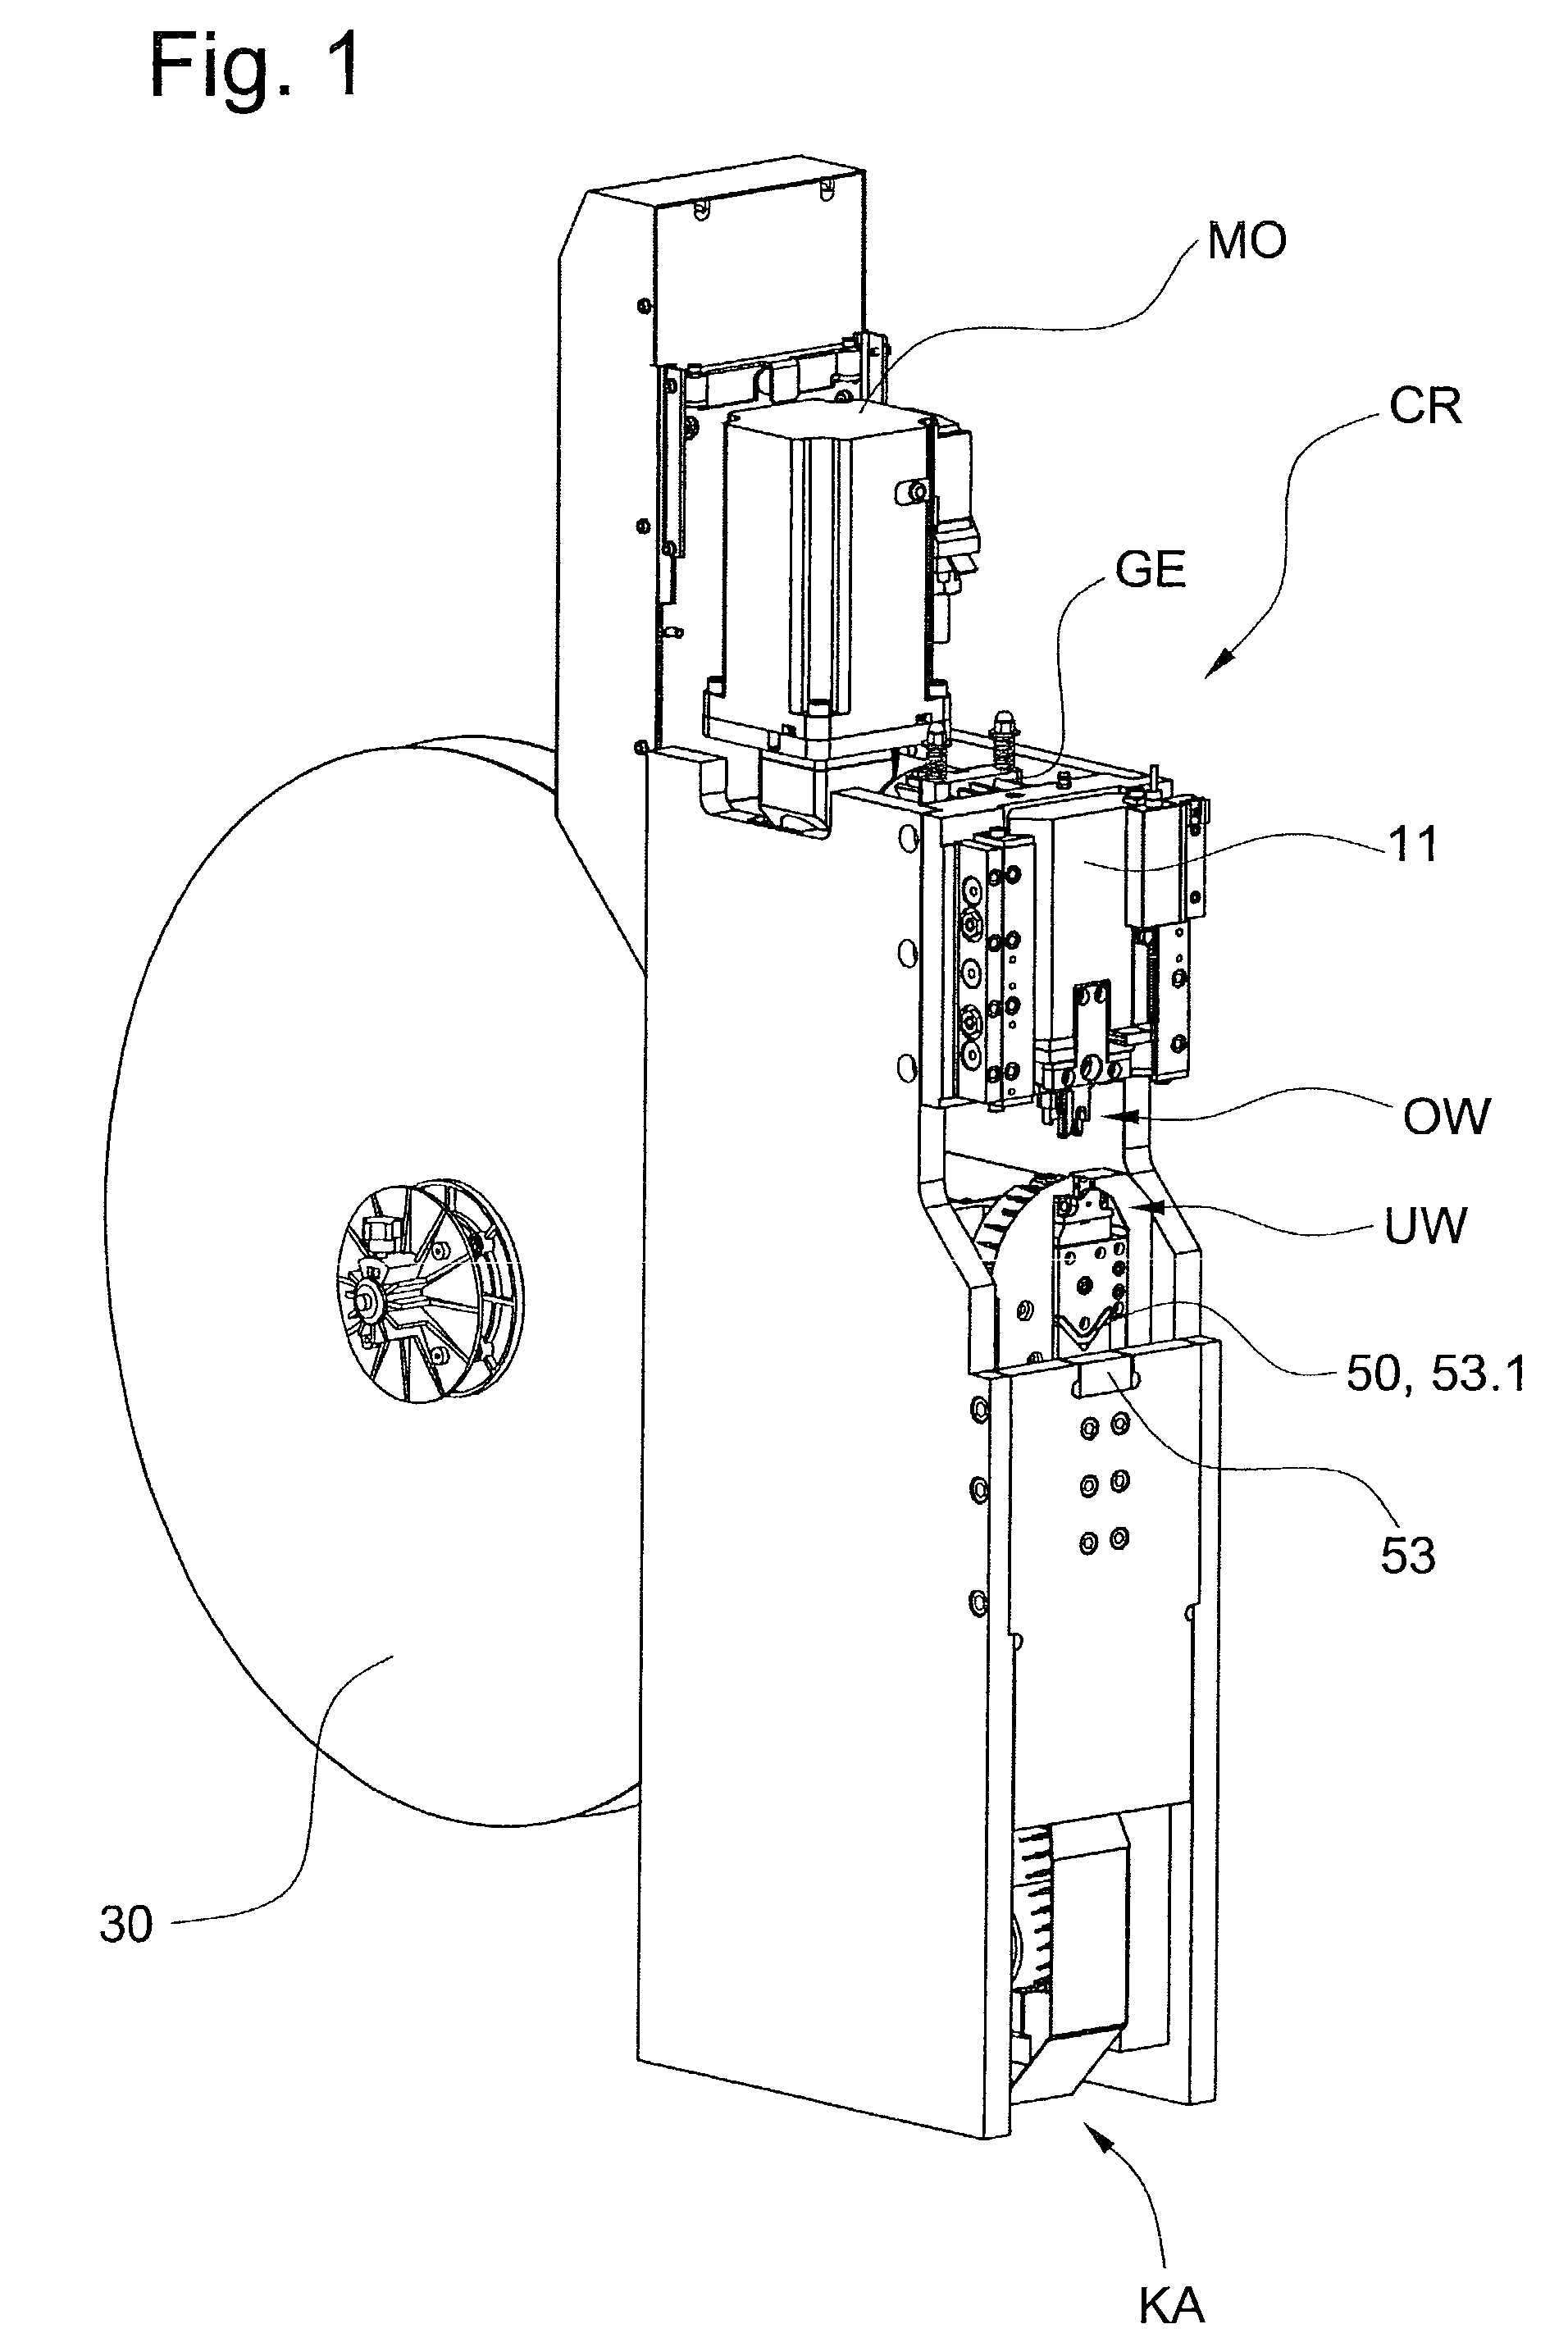 Crimping press with contact feed